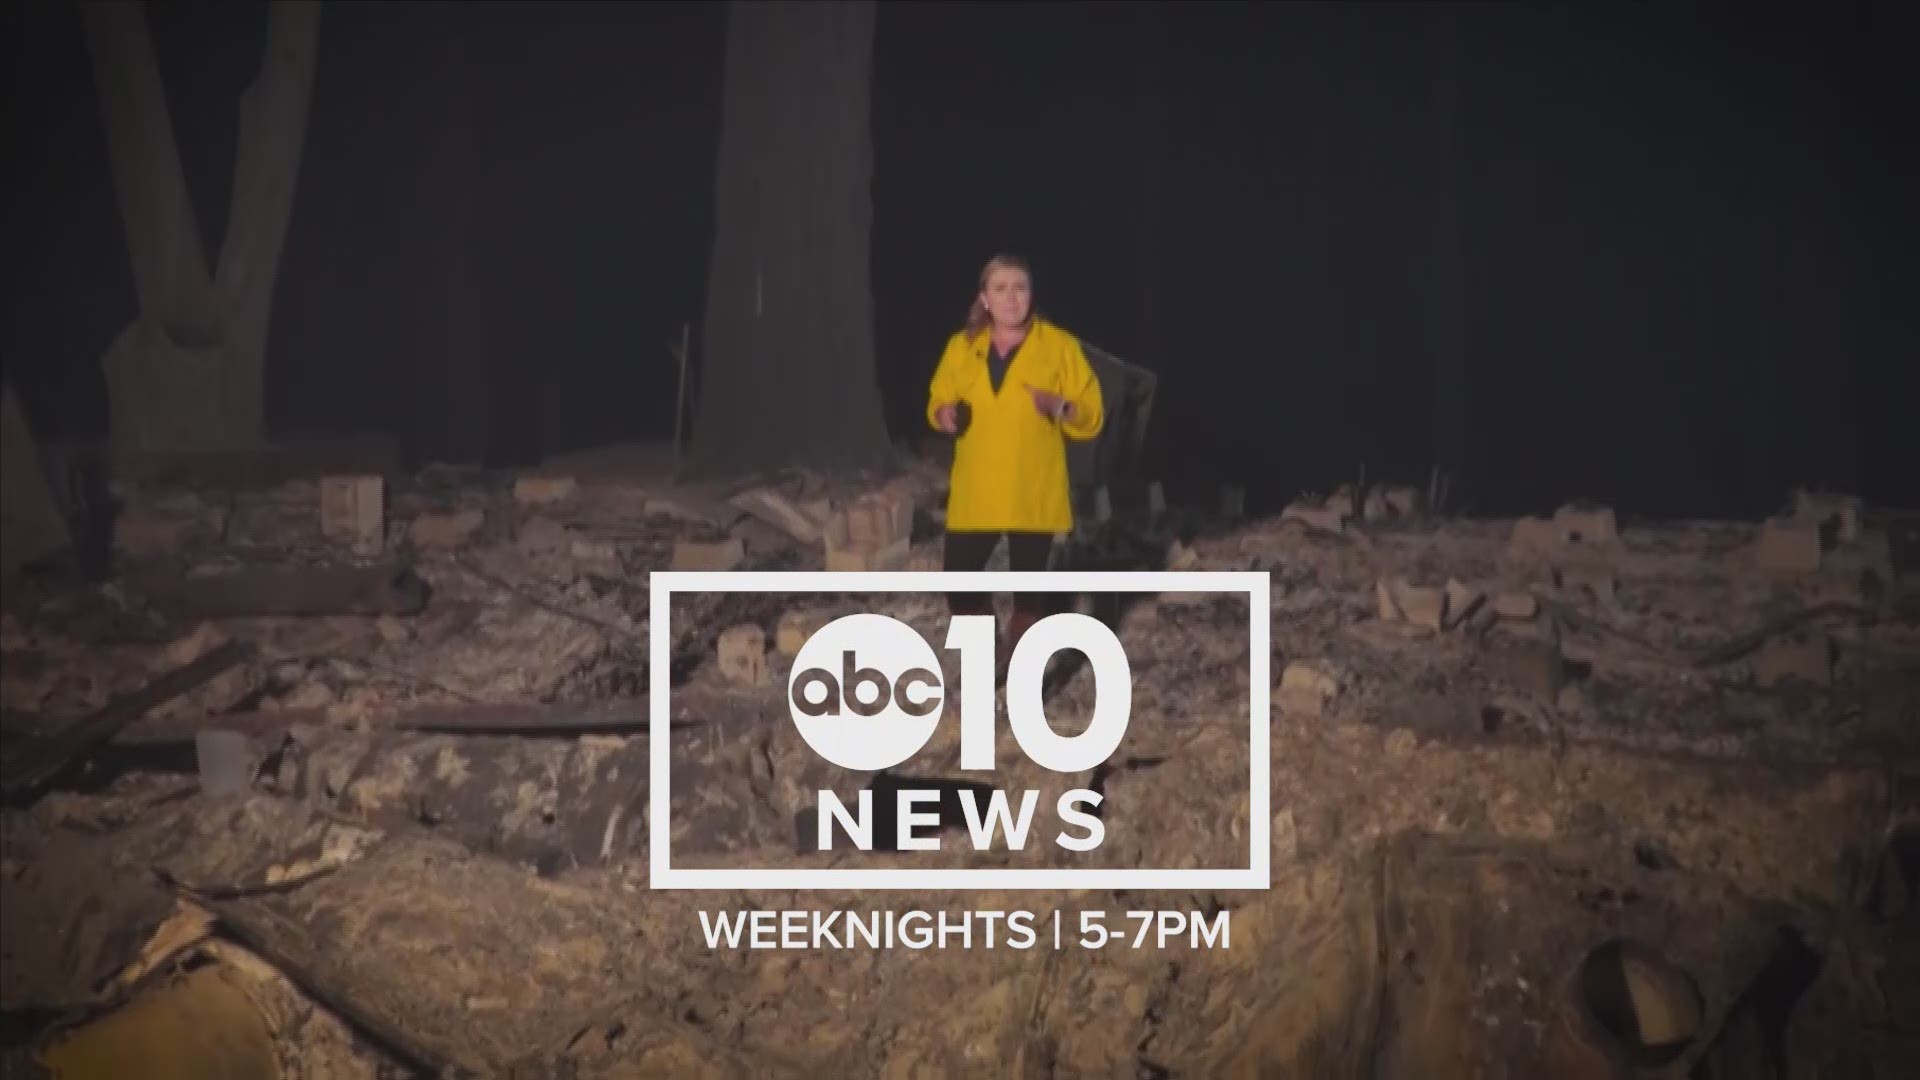 Watch ABC10 Evening Weeknights for all the latest local, national and global news